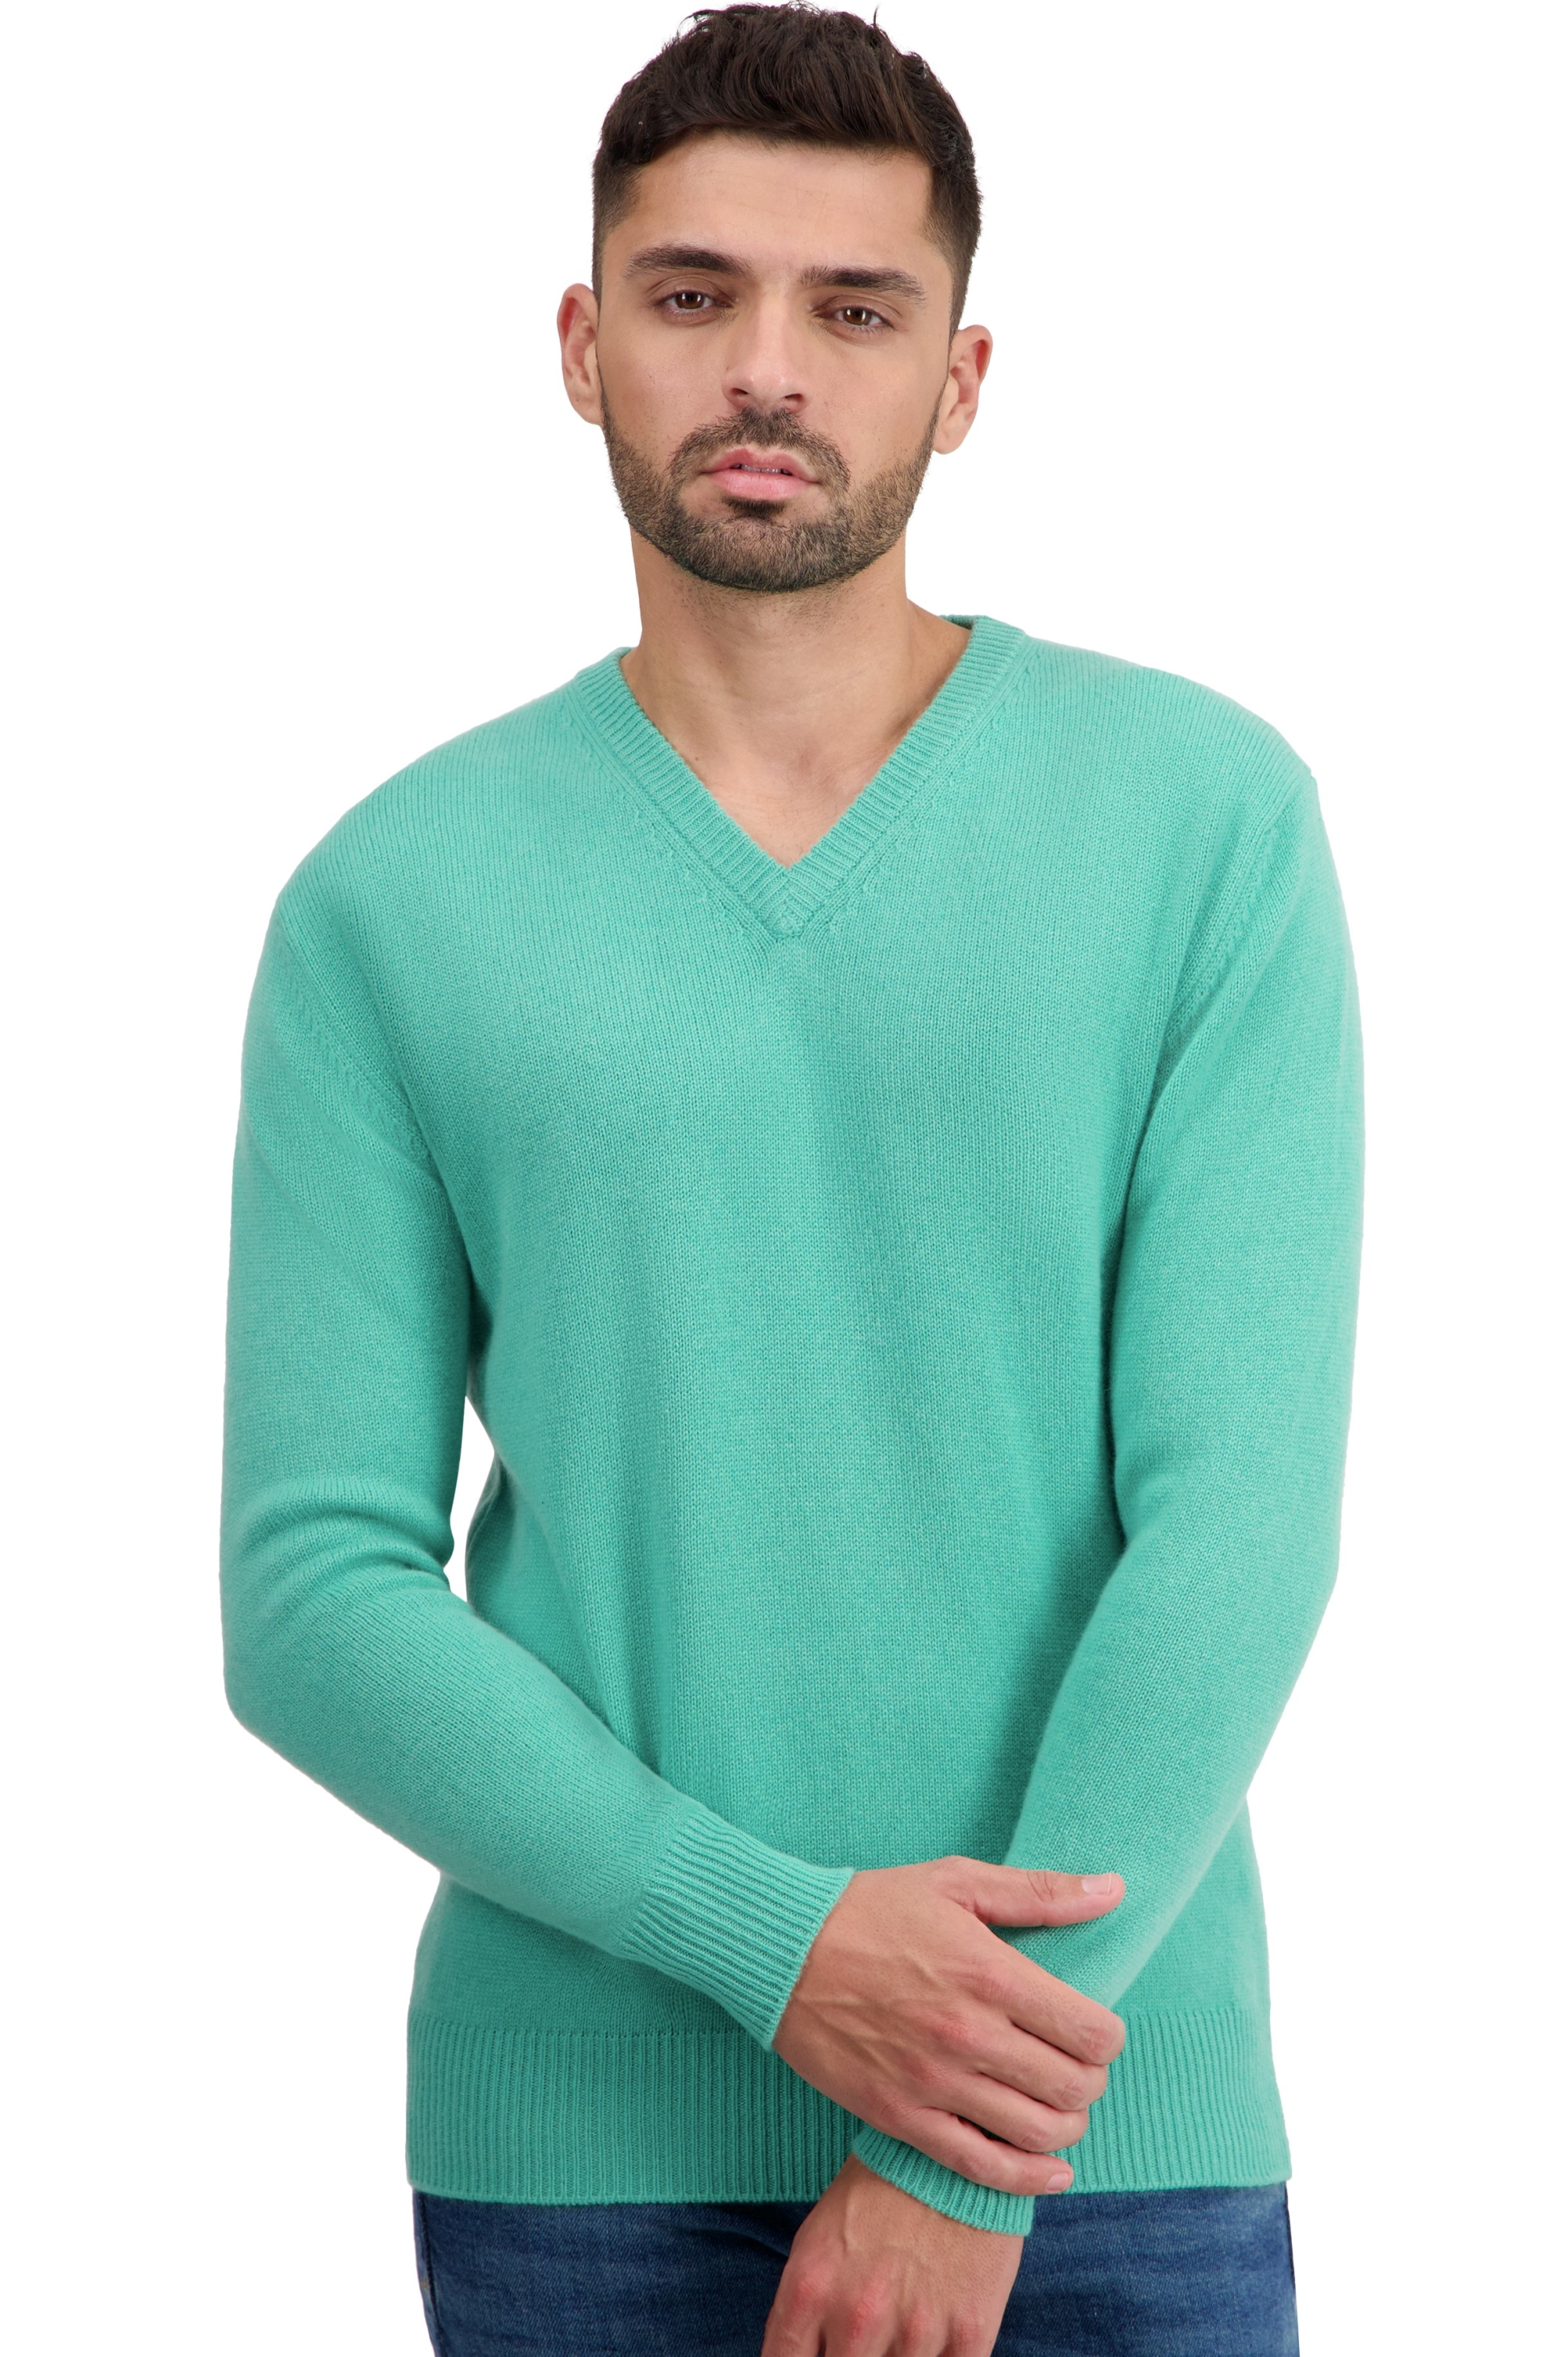 Cashmere men basic sweaters at low prices tour first nile l